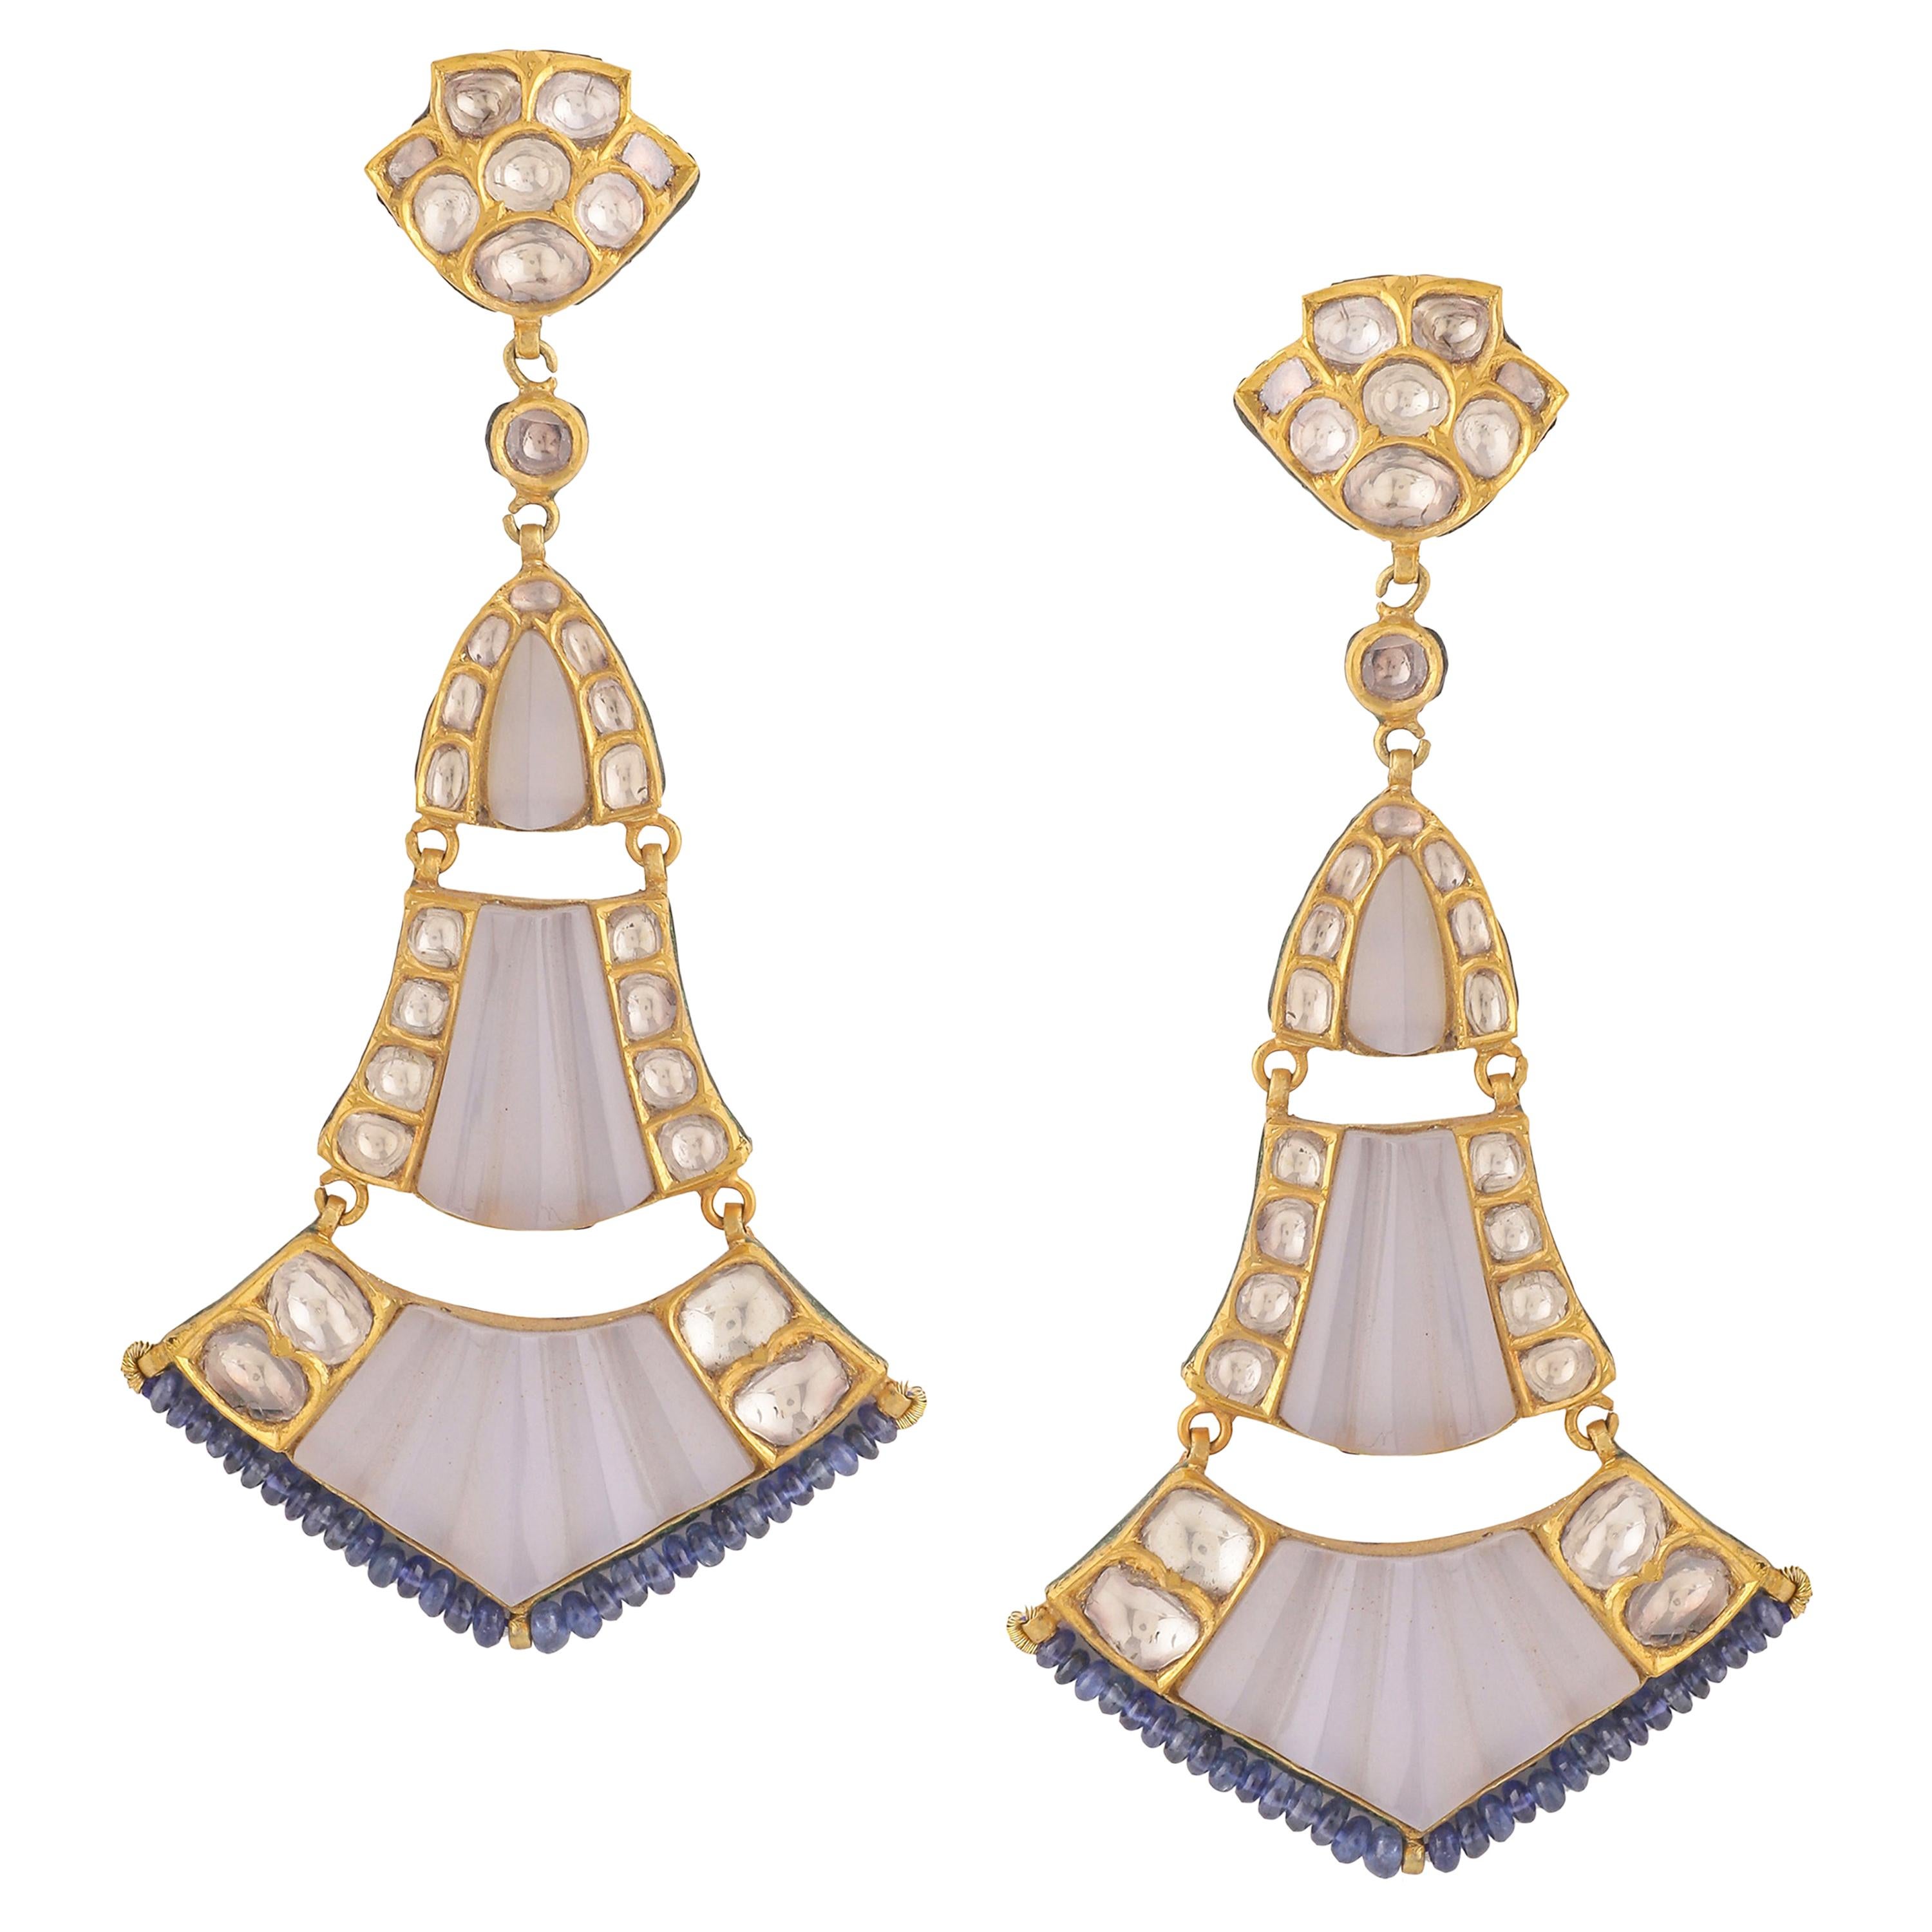 18k Gold Chandelier Earrings with Diamonds, Carved Chalcedony and Sapphire Beads